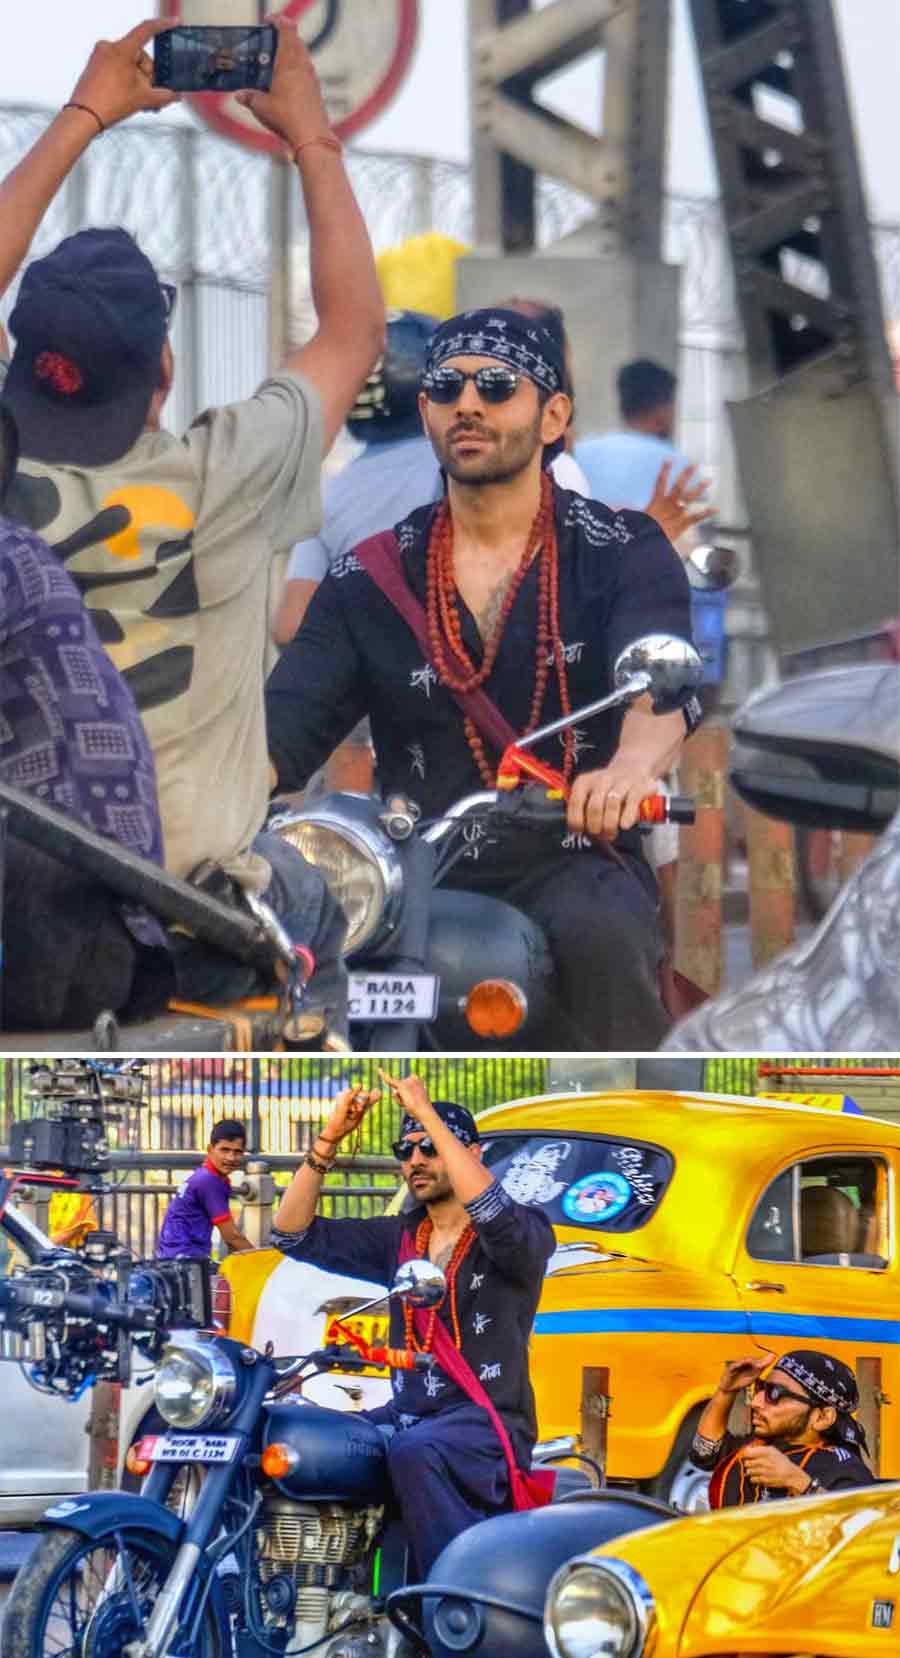 Actor Kartik Aaryan was spotted on the Howrah Bridge riding a motorcycle in his Rooh Baba avatar. He is in the city to shoot for his next film Bhool Bhulaiyaa 3 